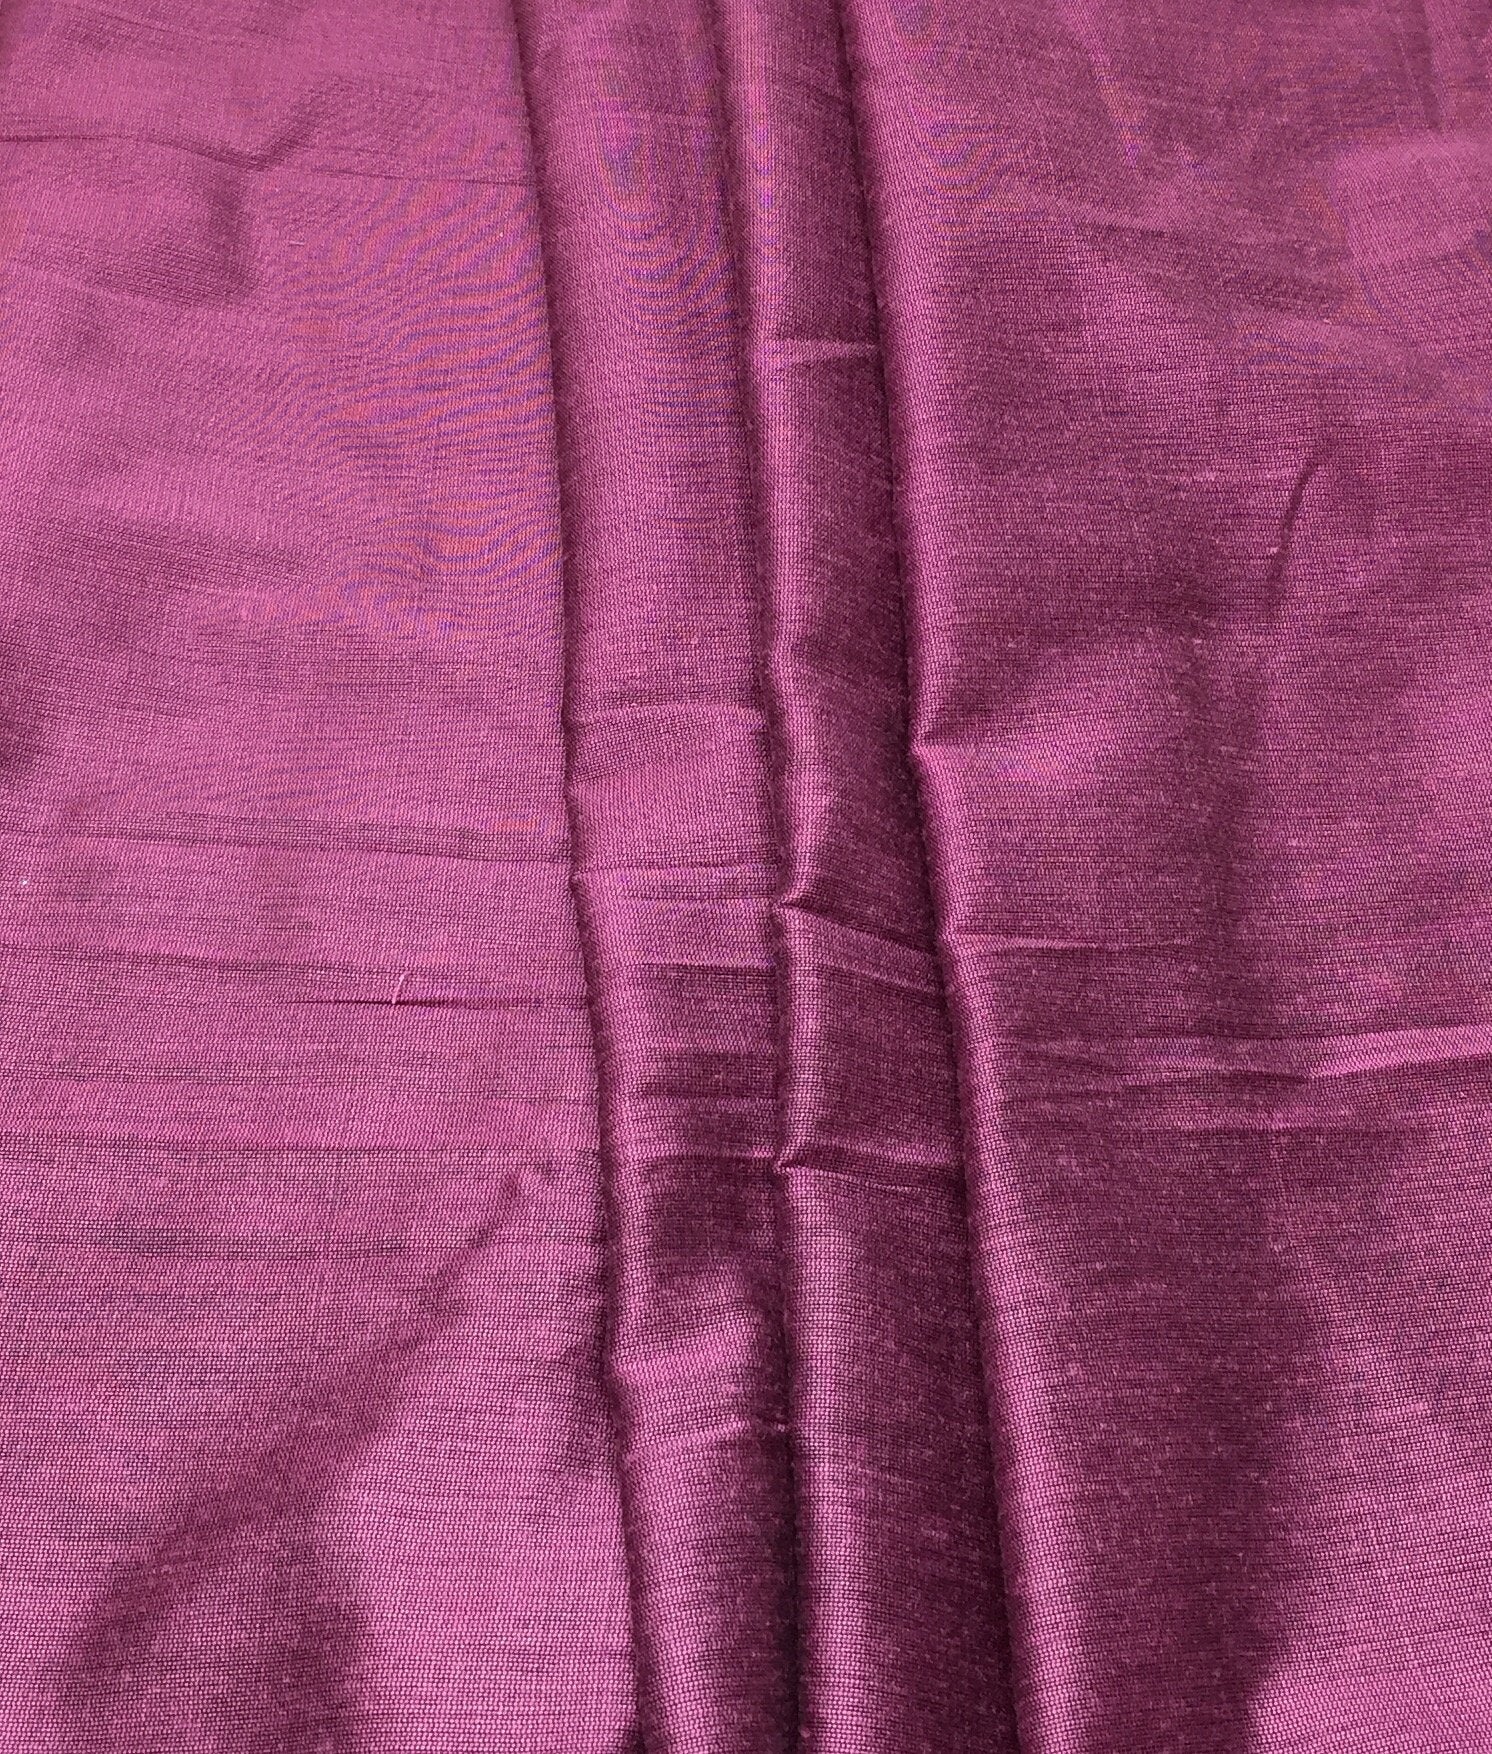 Cotton Silk Purple Solids  Fabric Material - By the yard